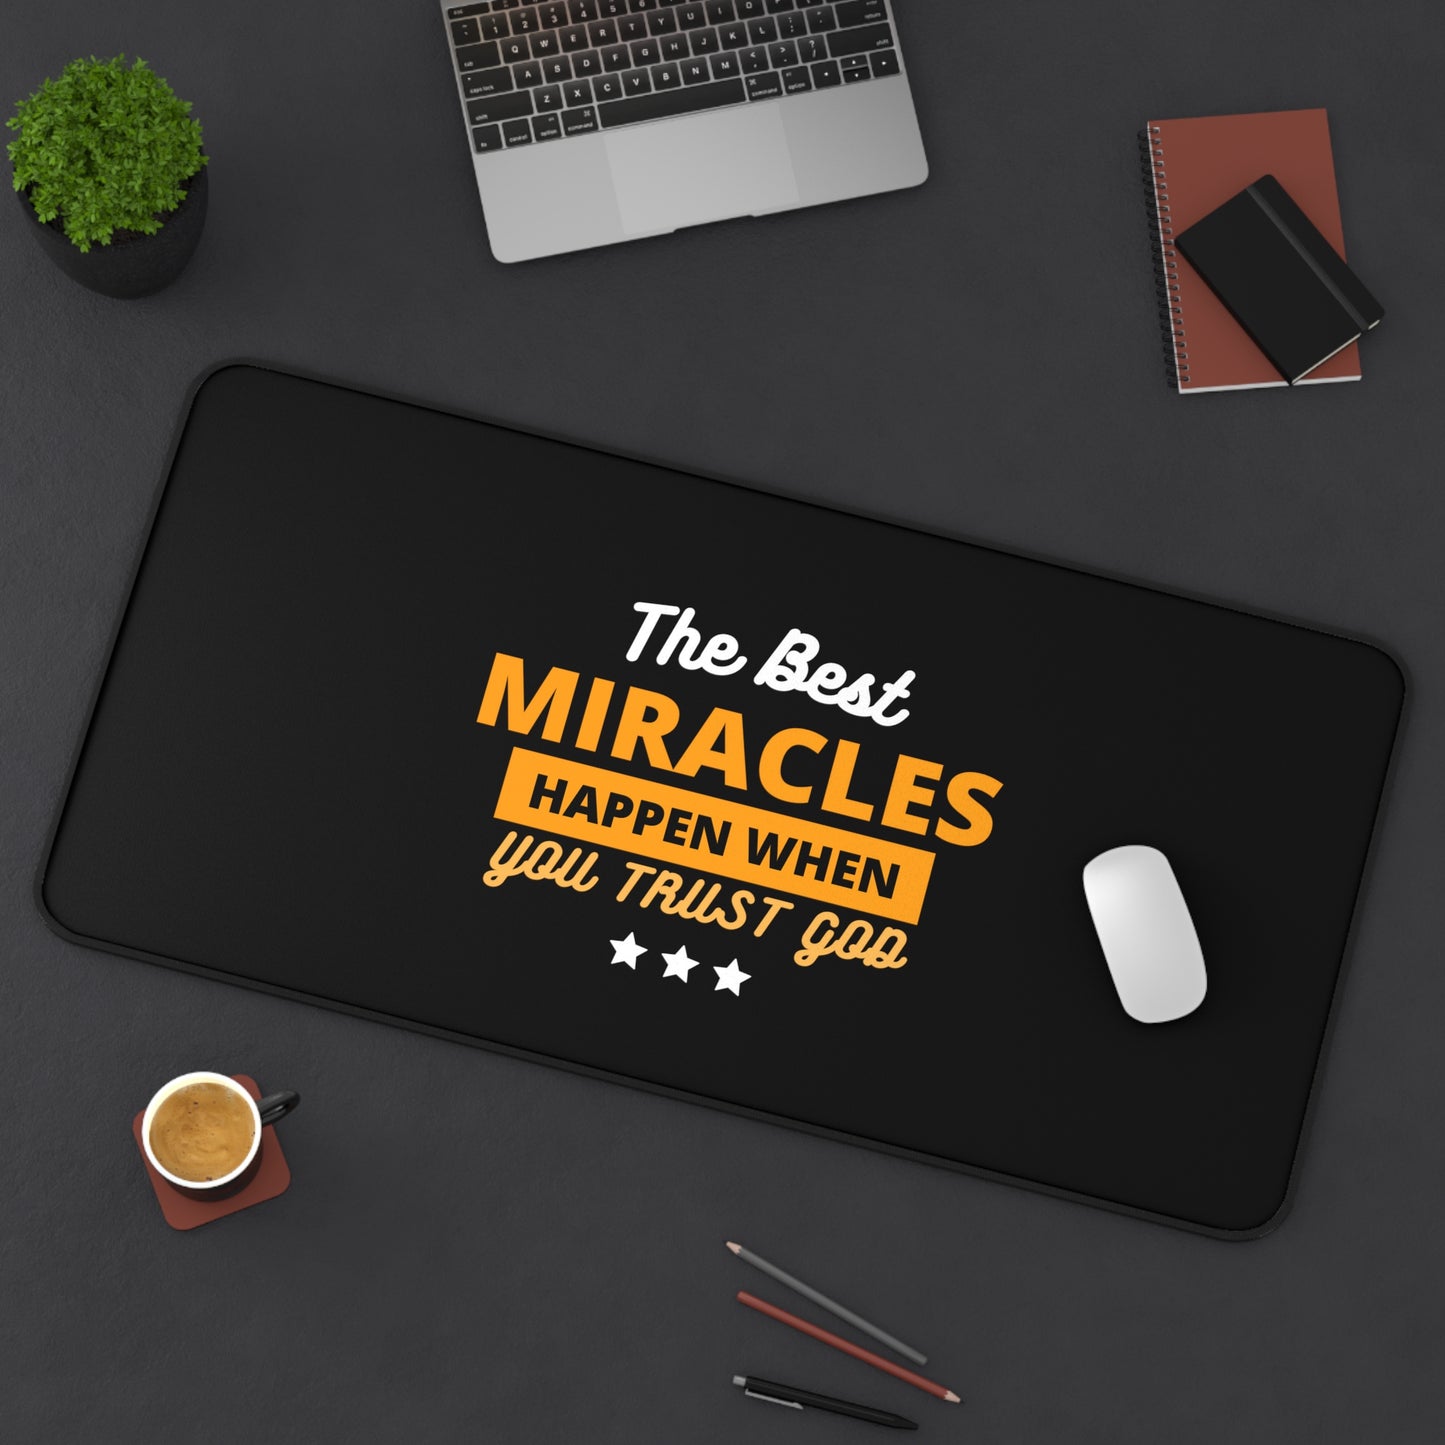 The Best Miracles Happen When You Trust God Christian Computer Keyboard Mouse Desk Mat